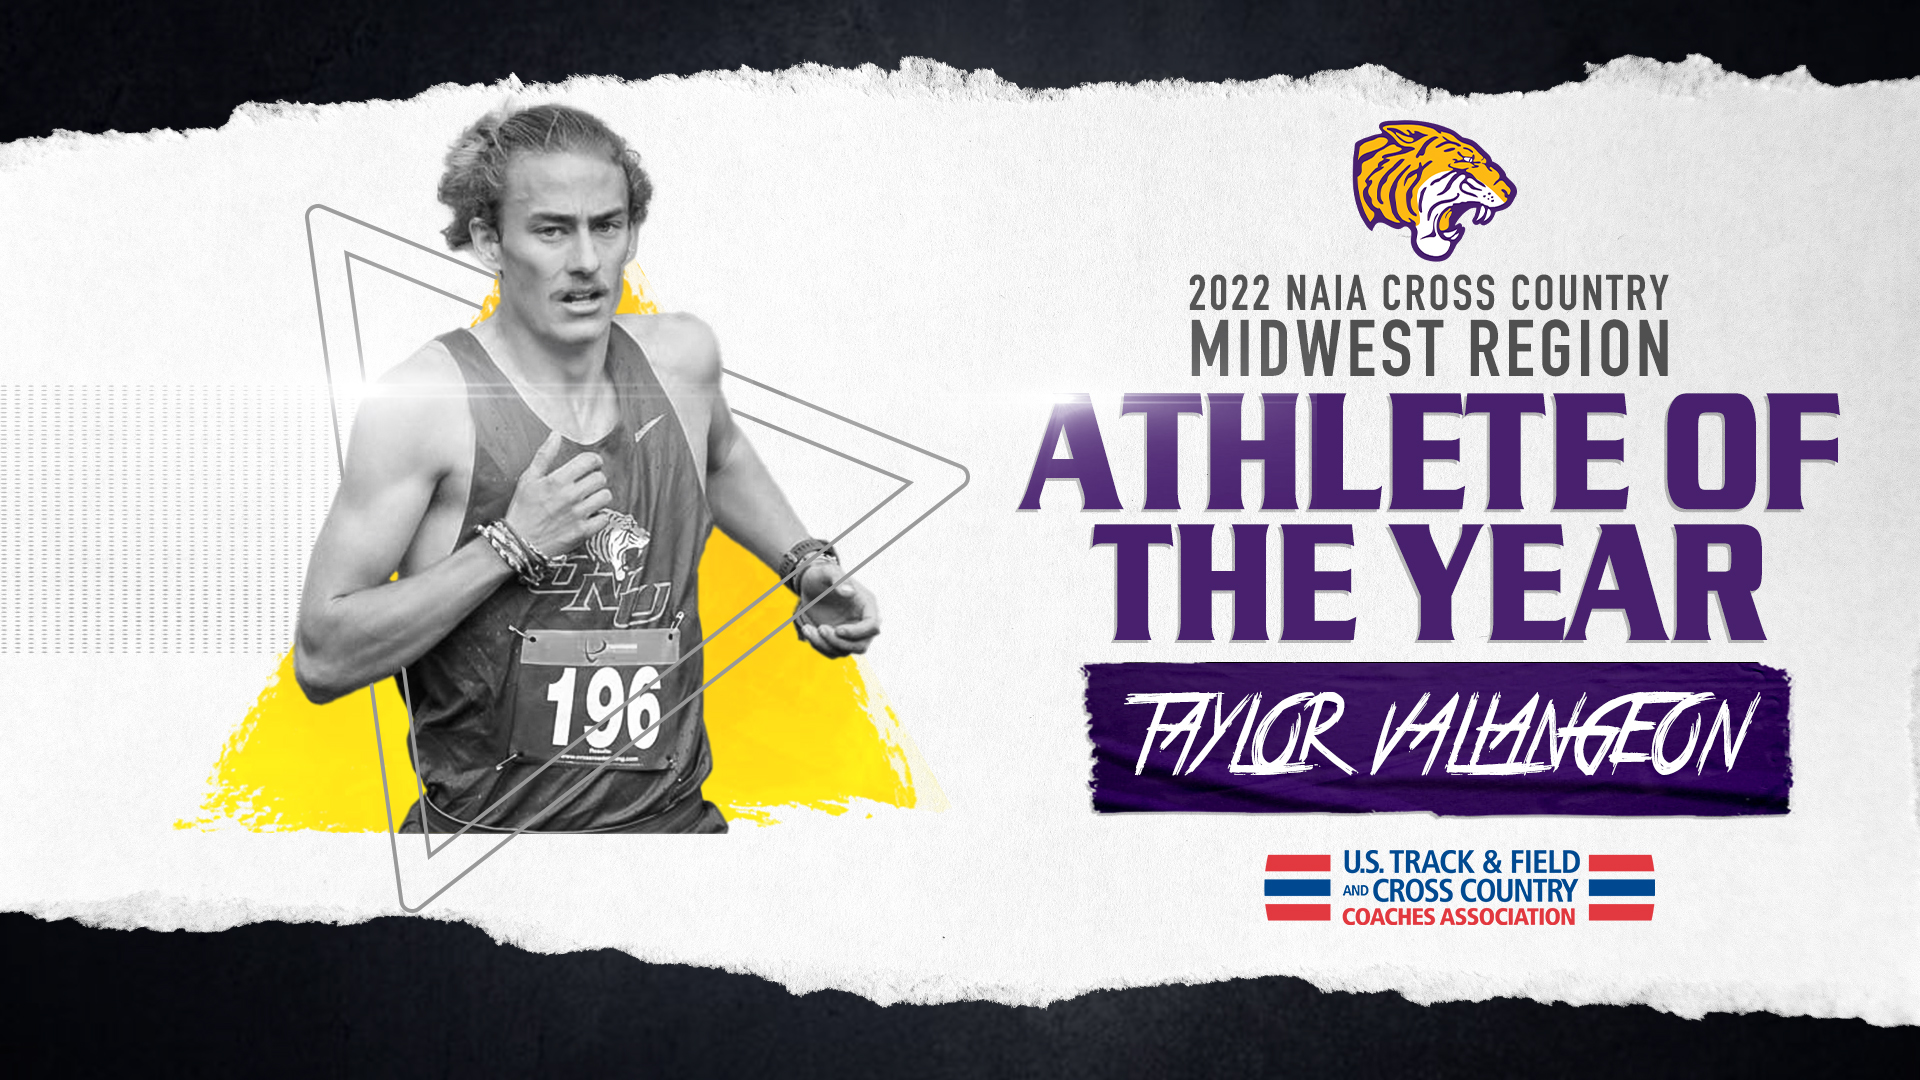 VALLANGEON NAMED NAIA MIDWEST REGION MEN’S ATHLETE OF THE YEAR